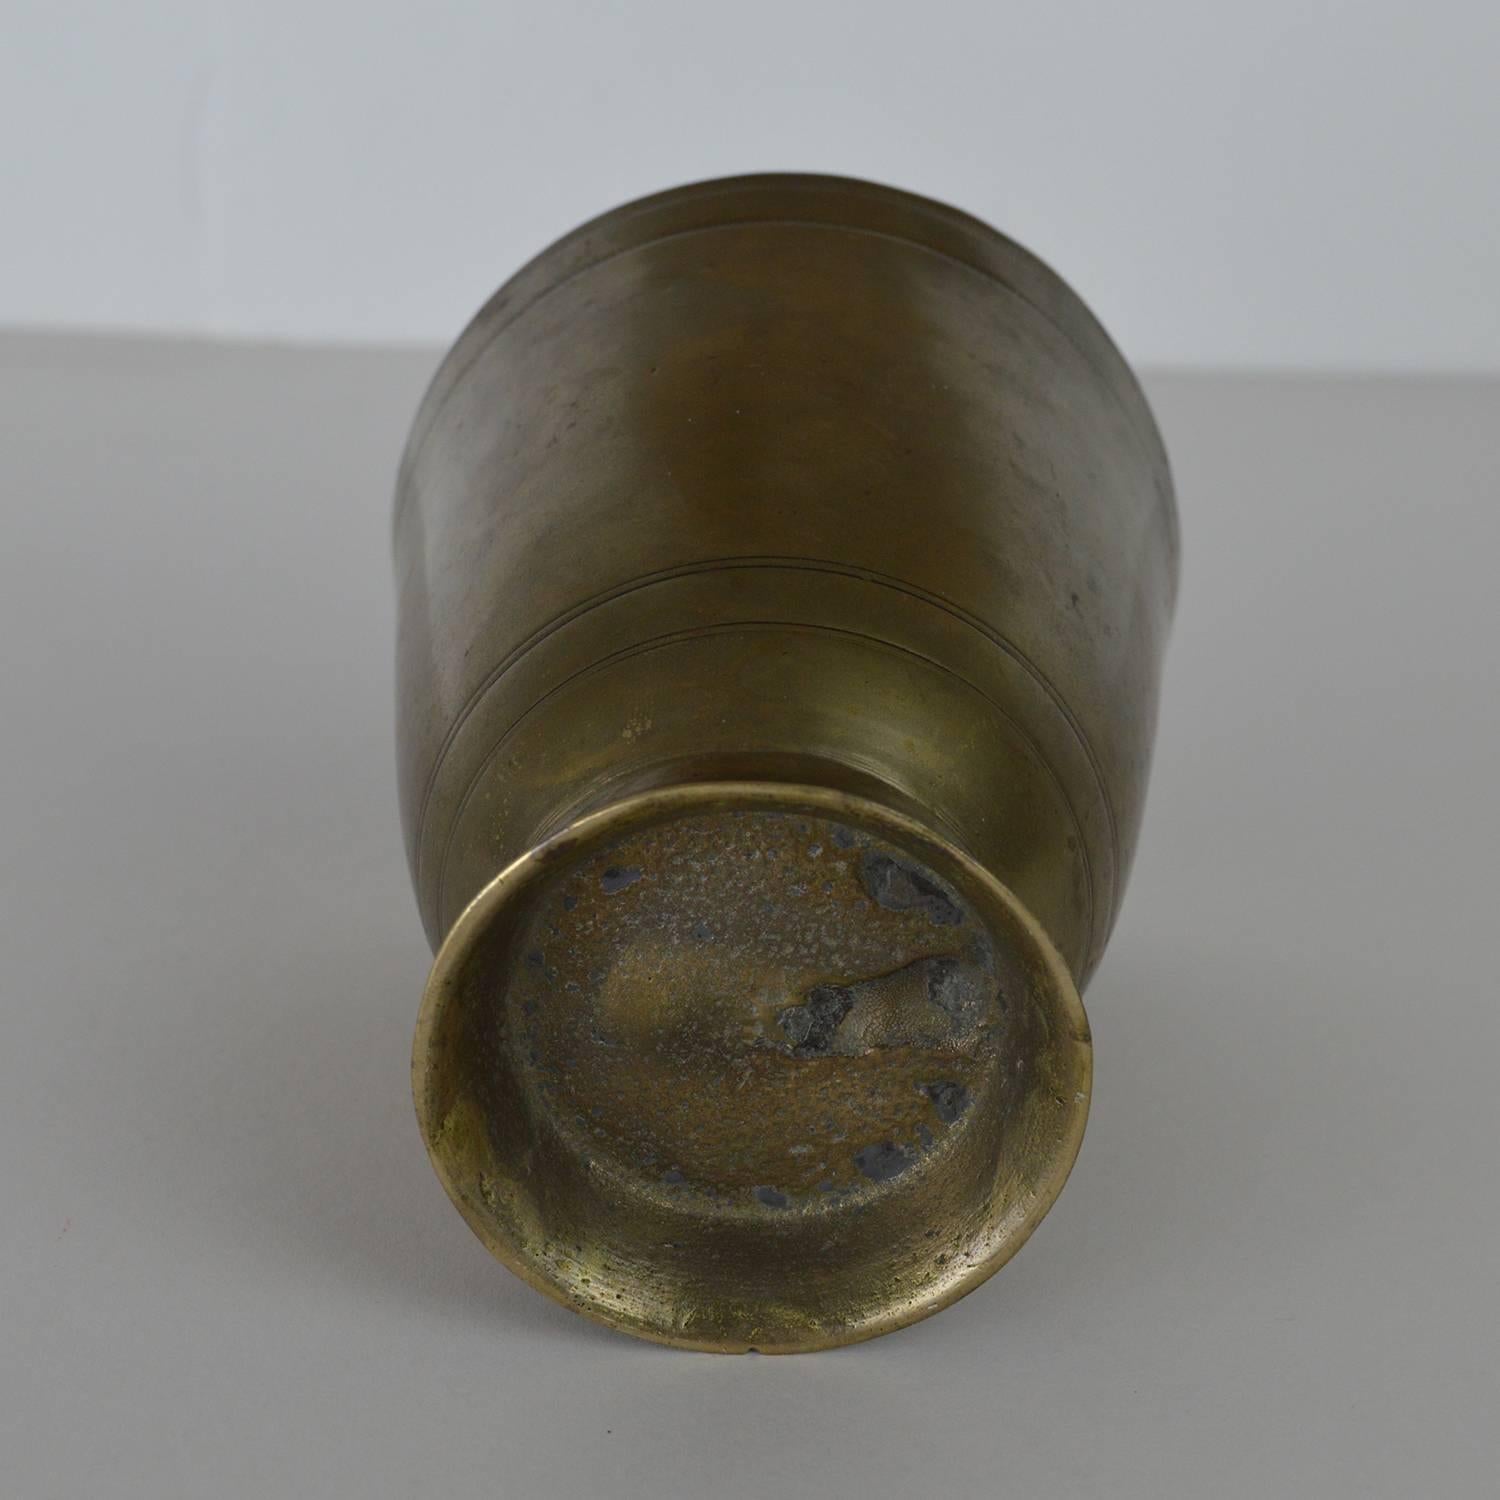 Turned Antique German Paktong Tumbler Cup, 17th Century